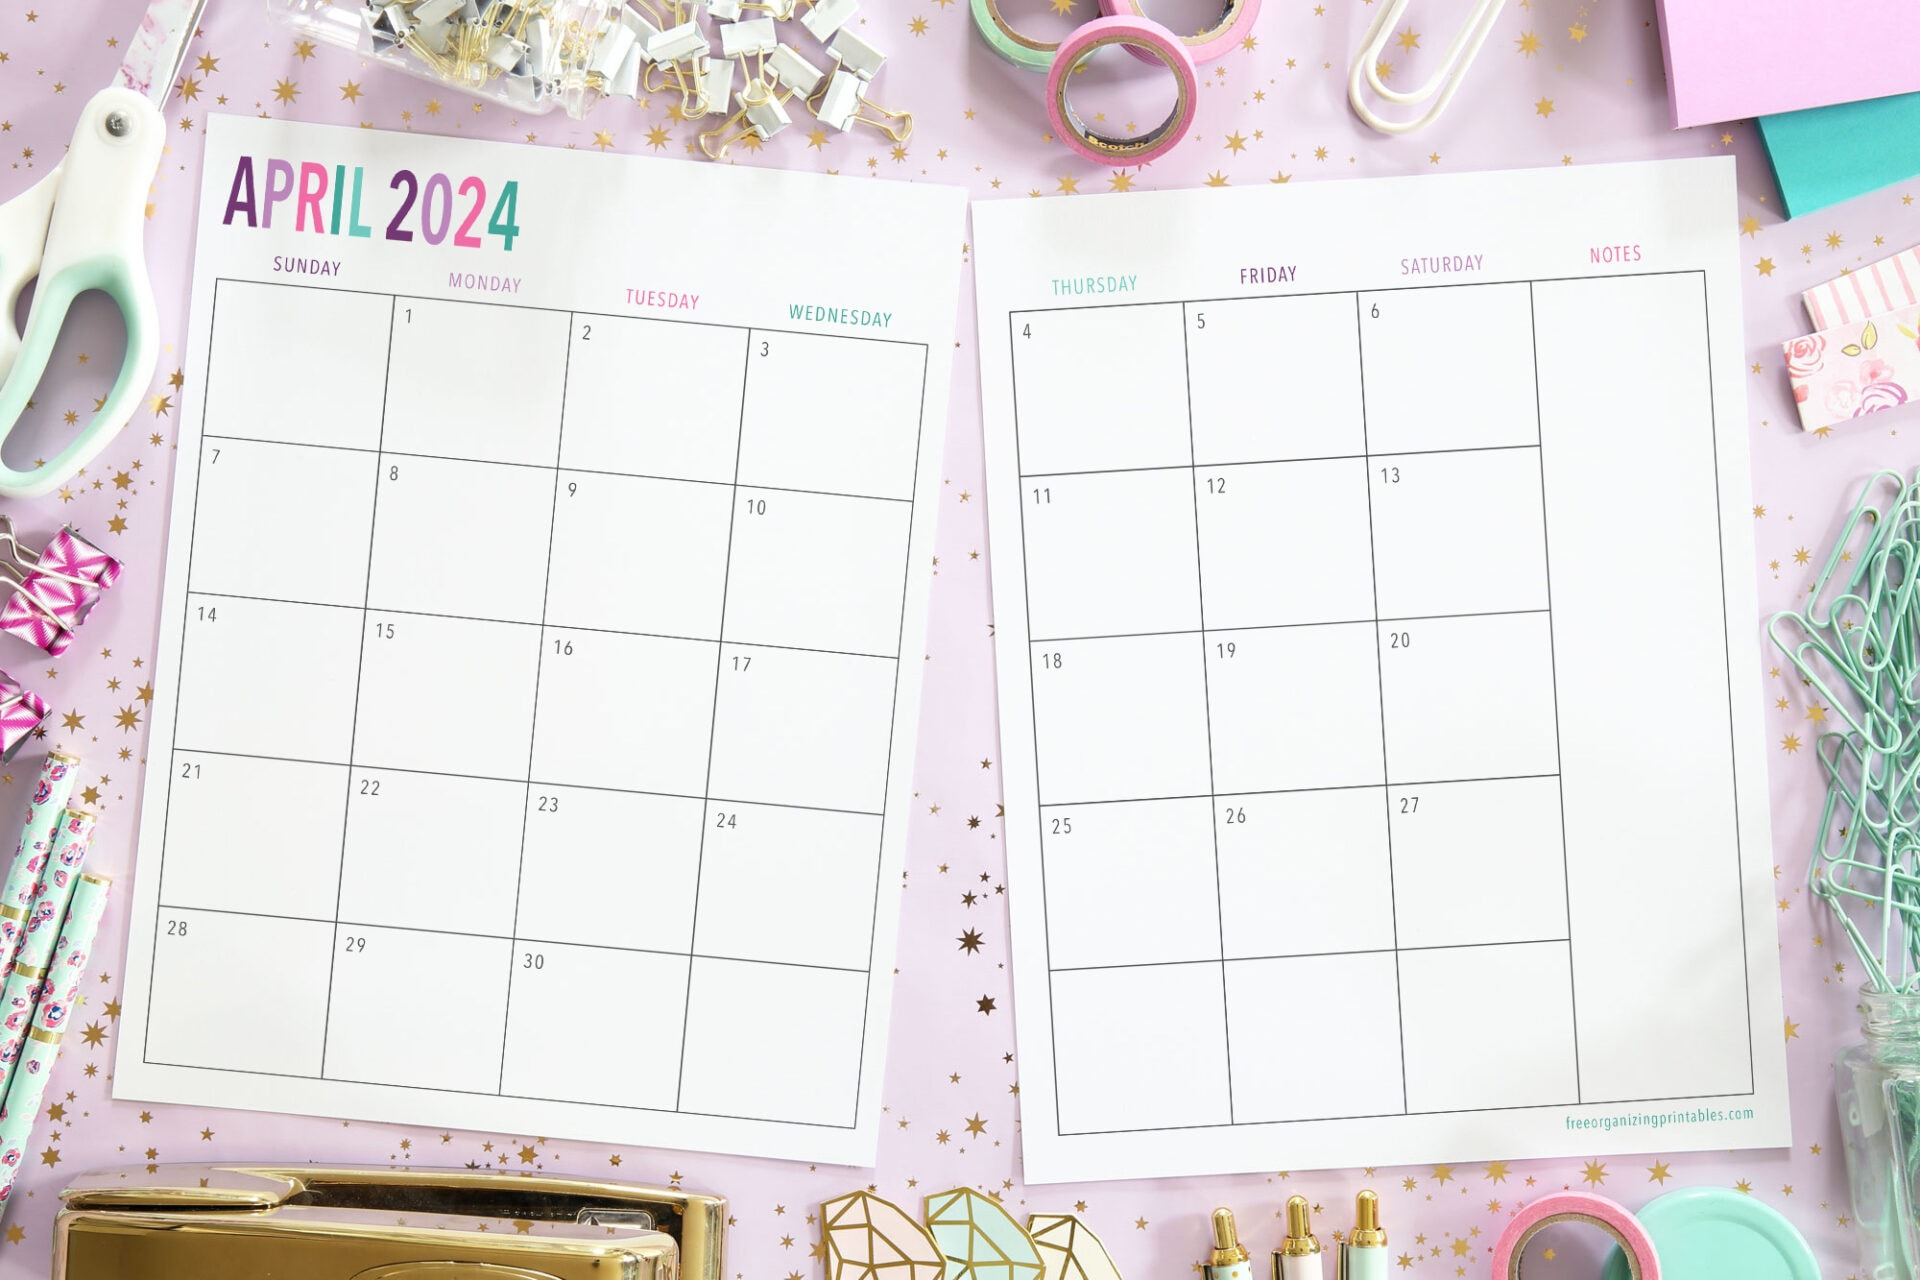 Free Printable 2 Page Blank Monthly Calendar 2024 | Free Printable Calendar 2024 Two Months Per Page